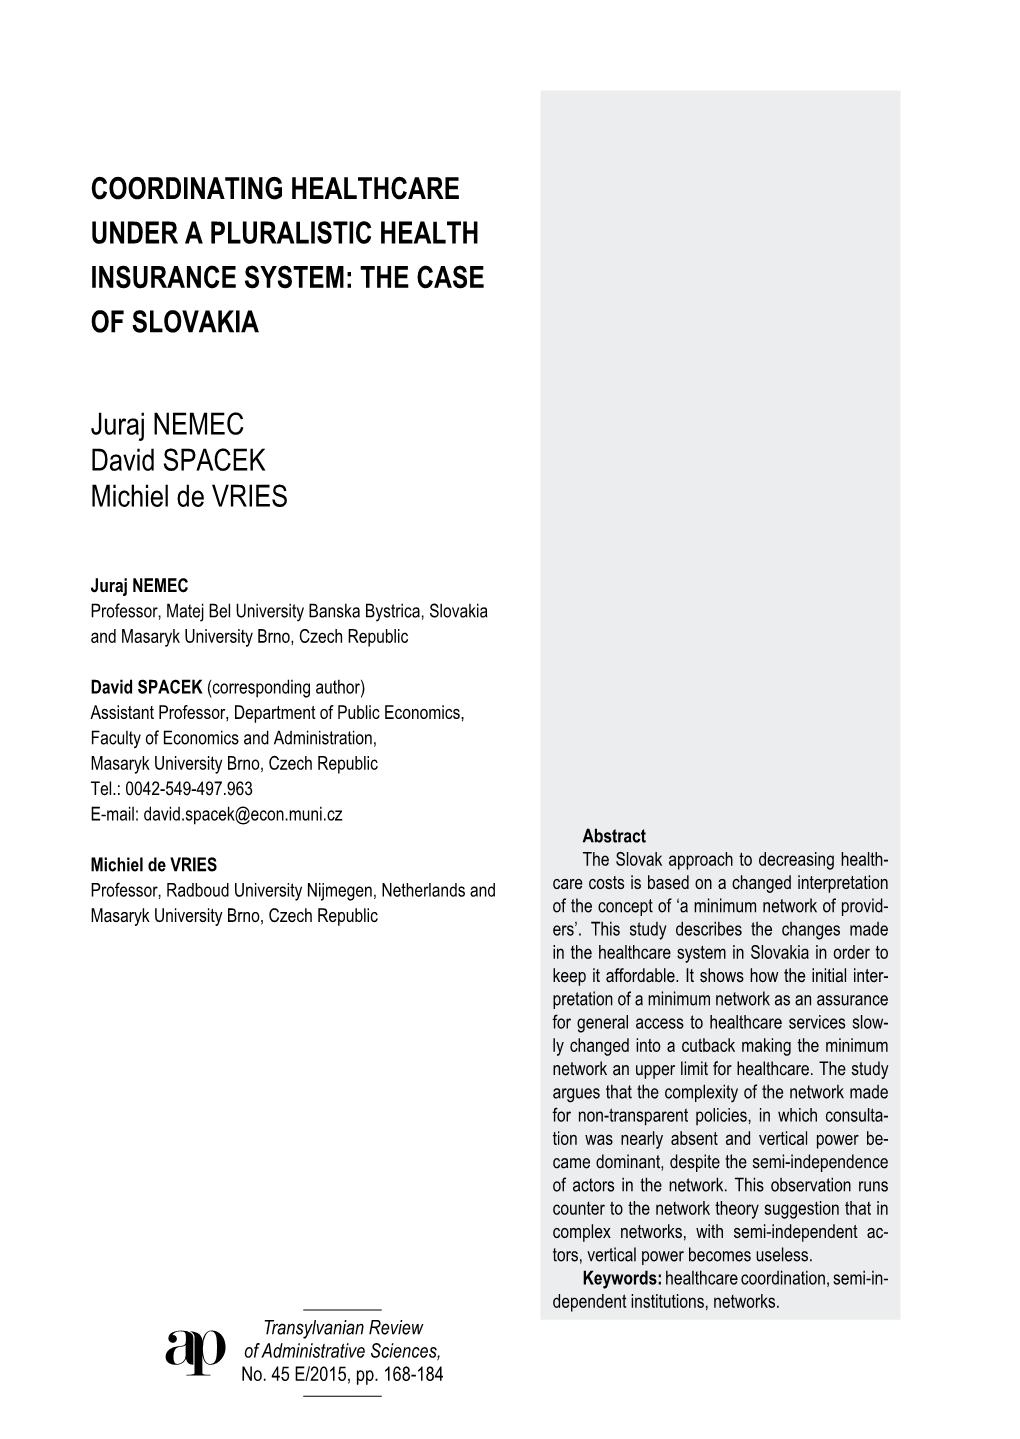 Coordinating Healthcare Under a Pluralistic Health Insurance System: the Case of Slovakia